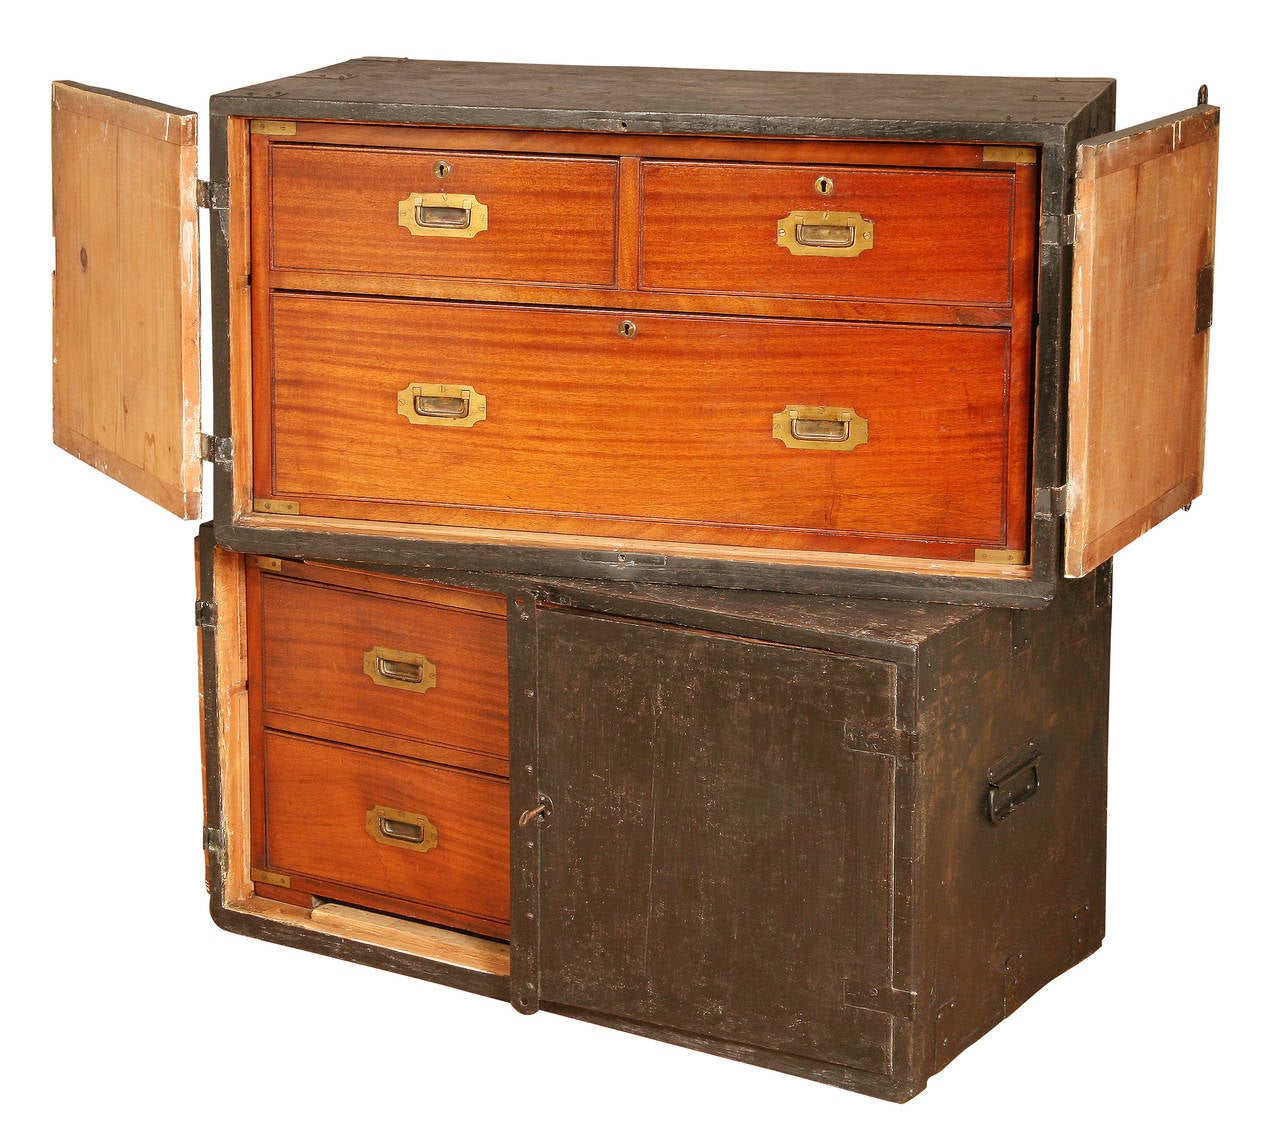 For travel, the feet would be removed and each section of this mahogany Campaign Chest would be fitted into one of its two packing cases. It is uncommon for campaign chests to retain their packing cases as they were often broken up or put to other